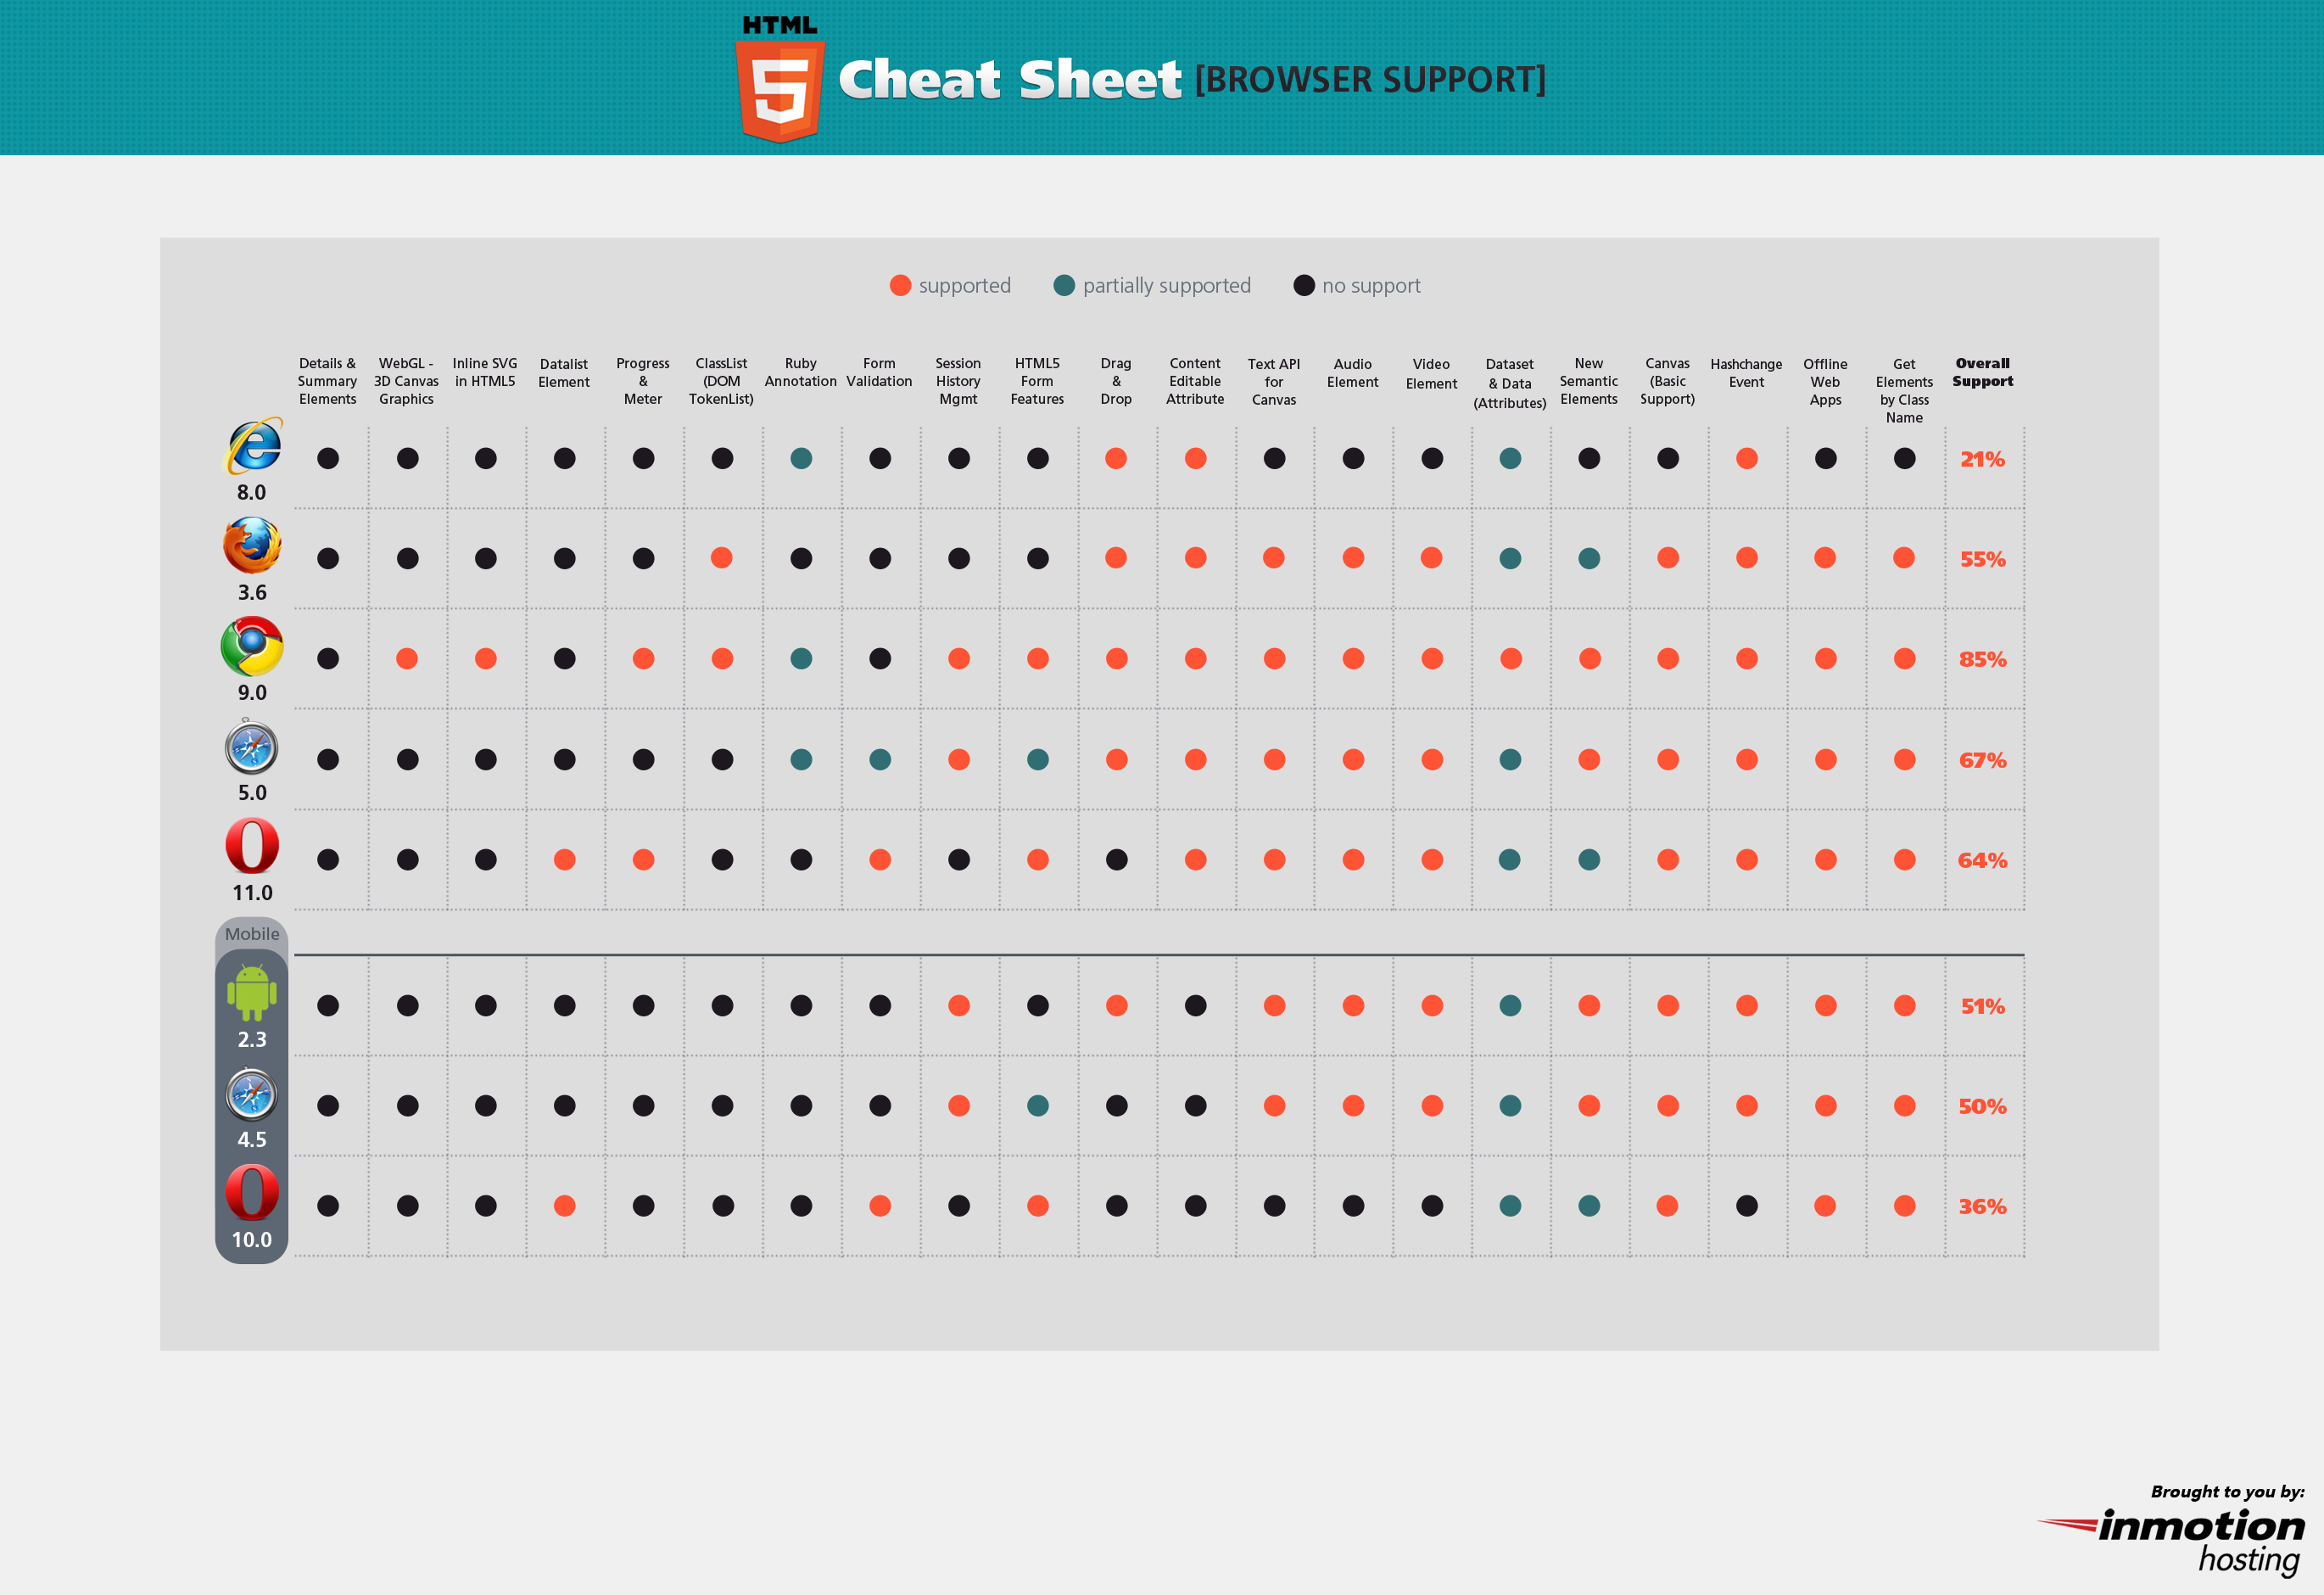 Html5 Browser Support Cheat Sheet by iNFOGRAPHiCs MANiA